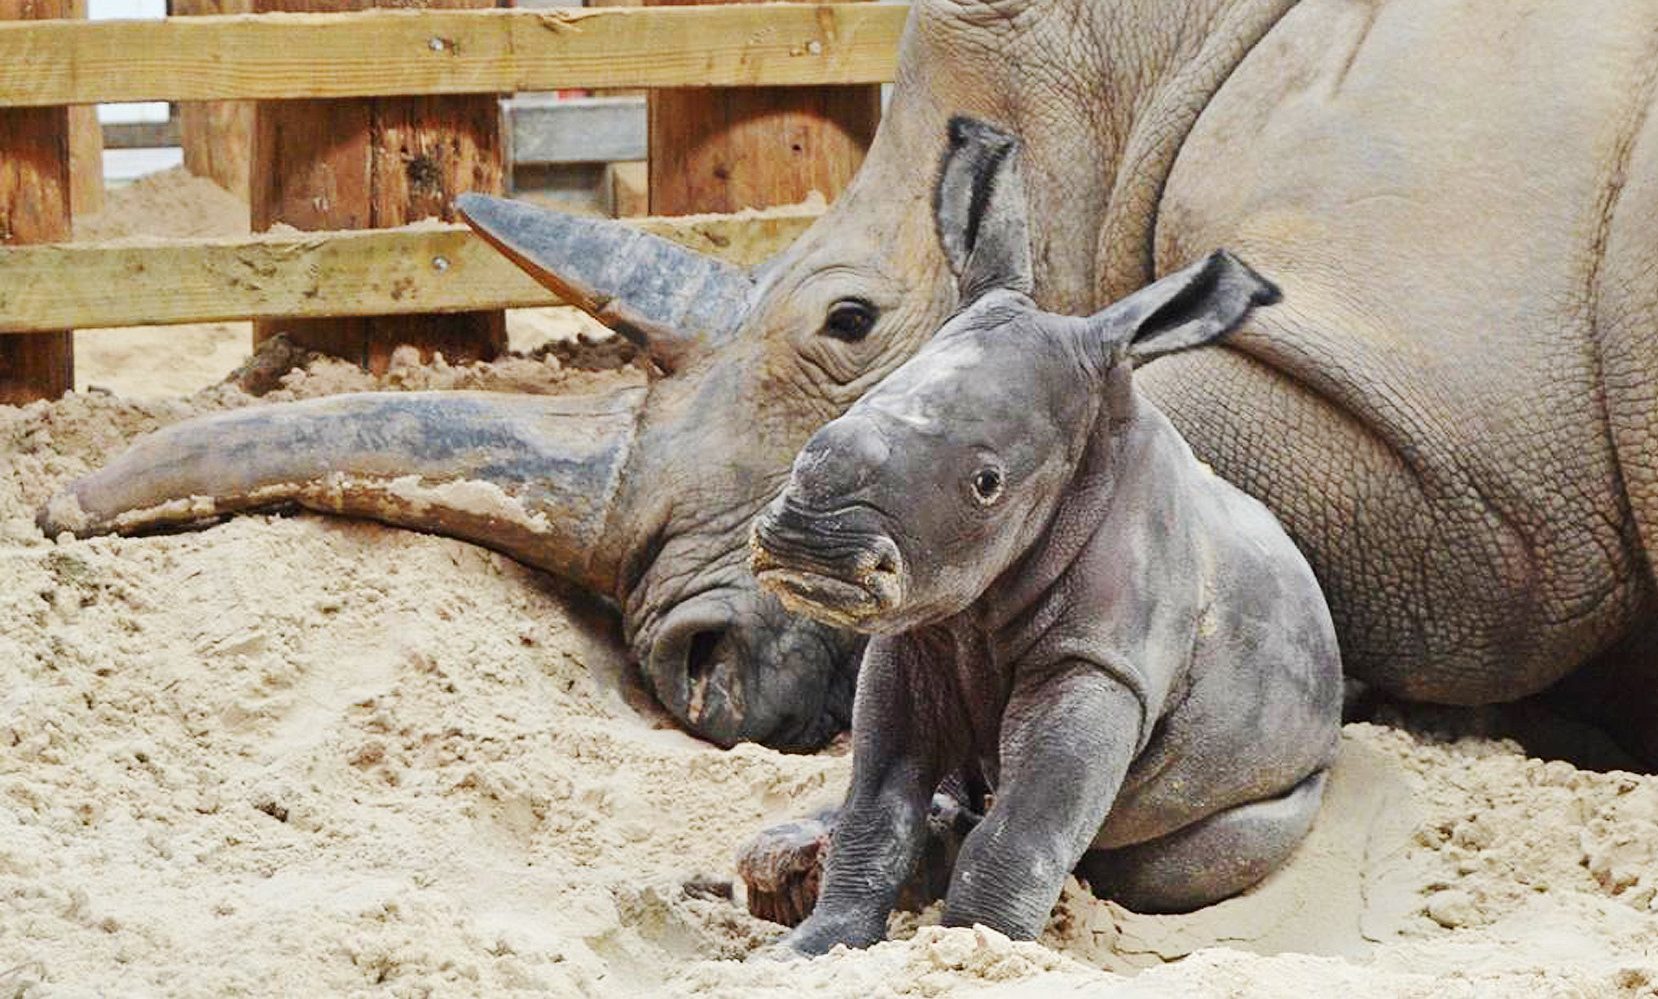 The southern white rhino calf with her mother Dot.